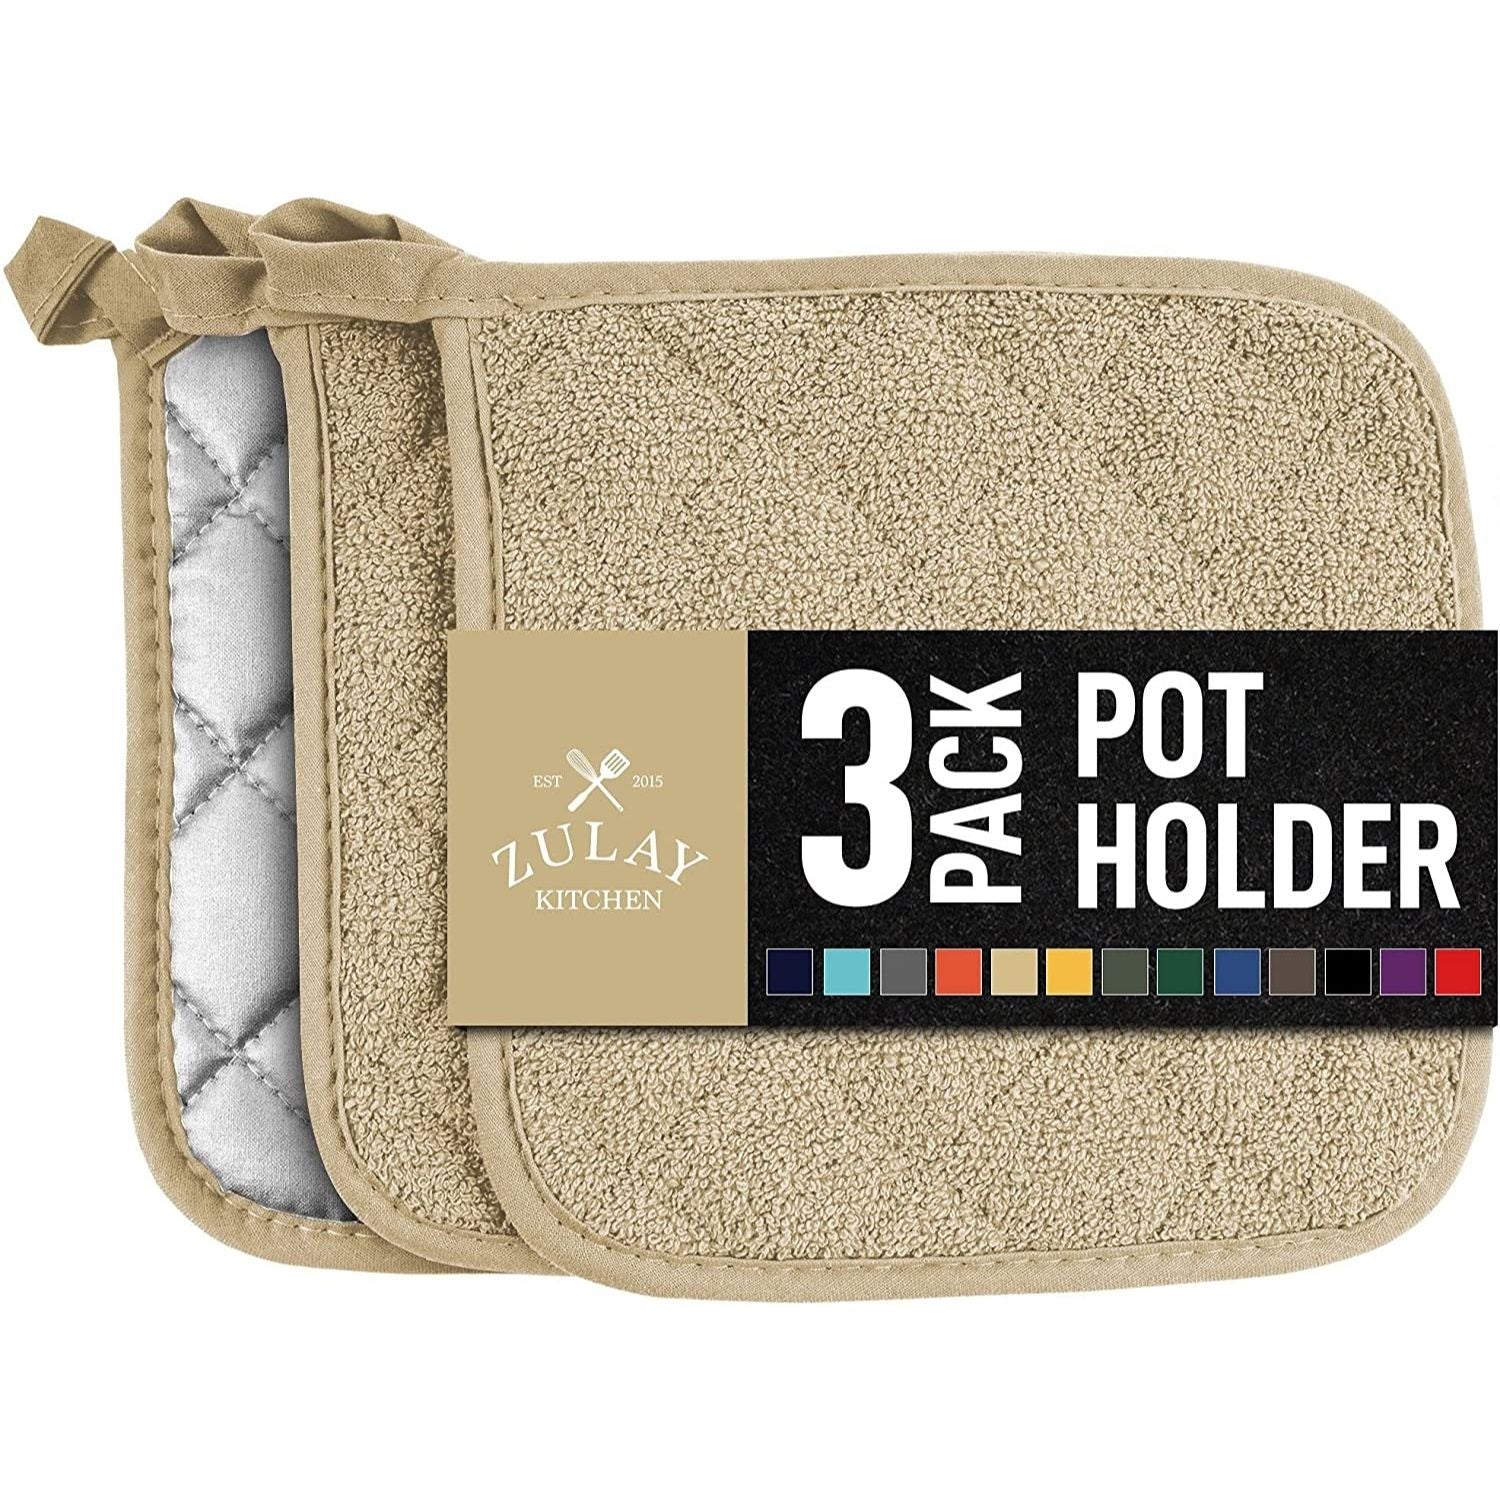 Pot Holders Set - 3 Pack Quilted Terry Cloth Potholders 7x7 Inch